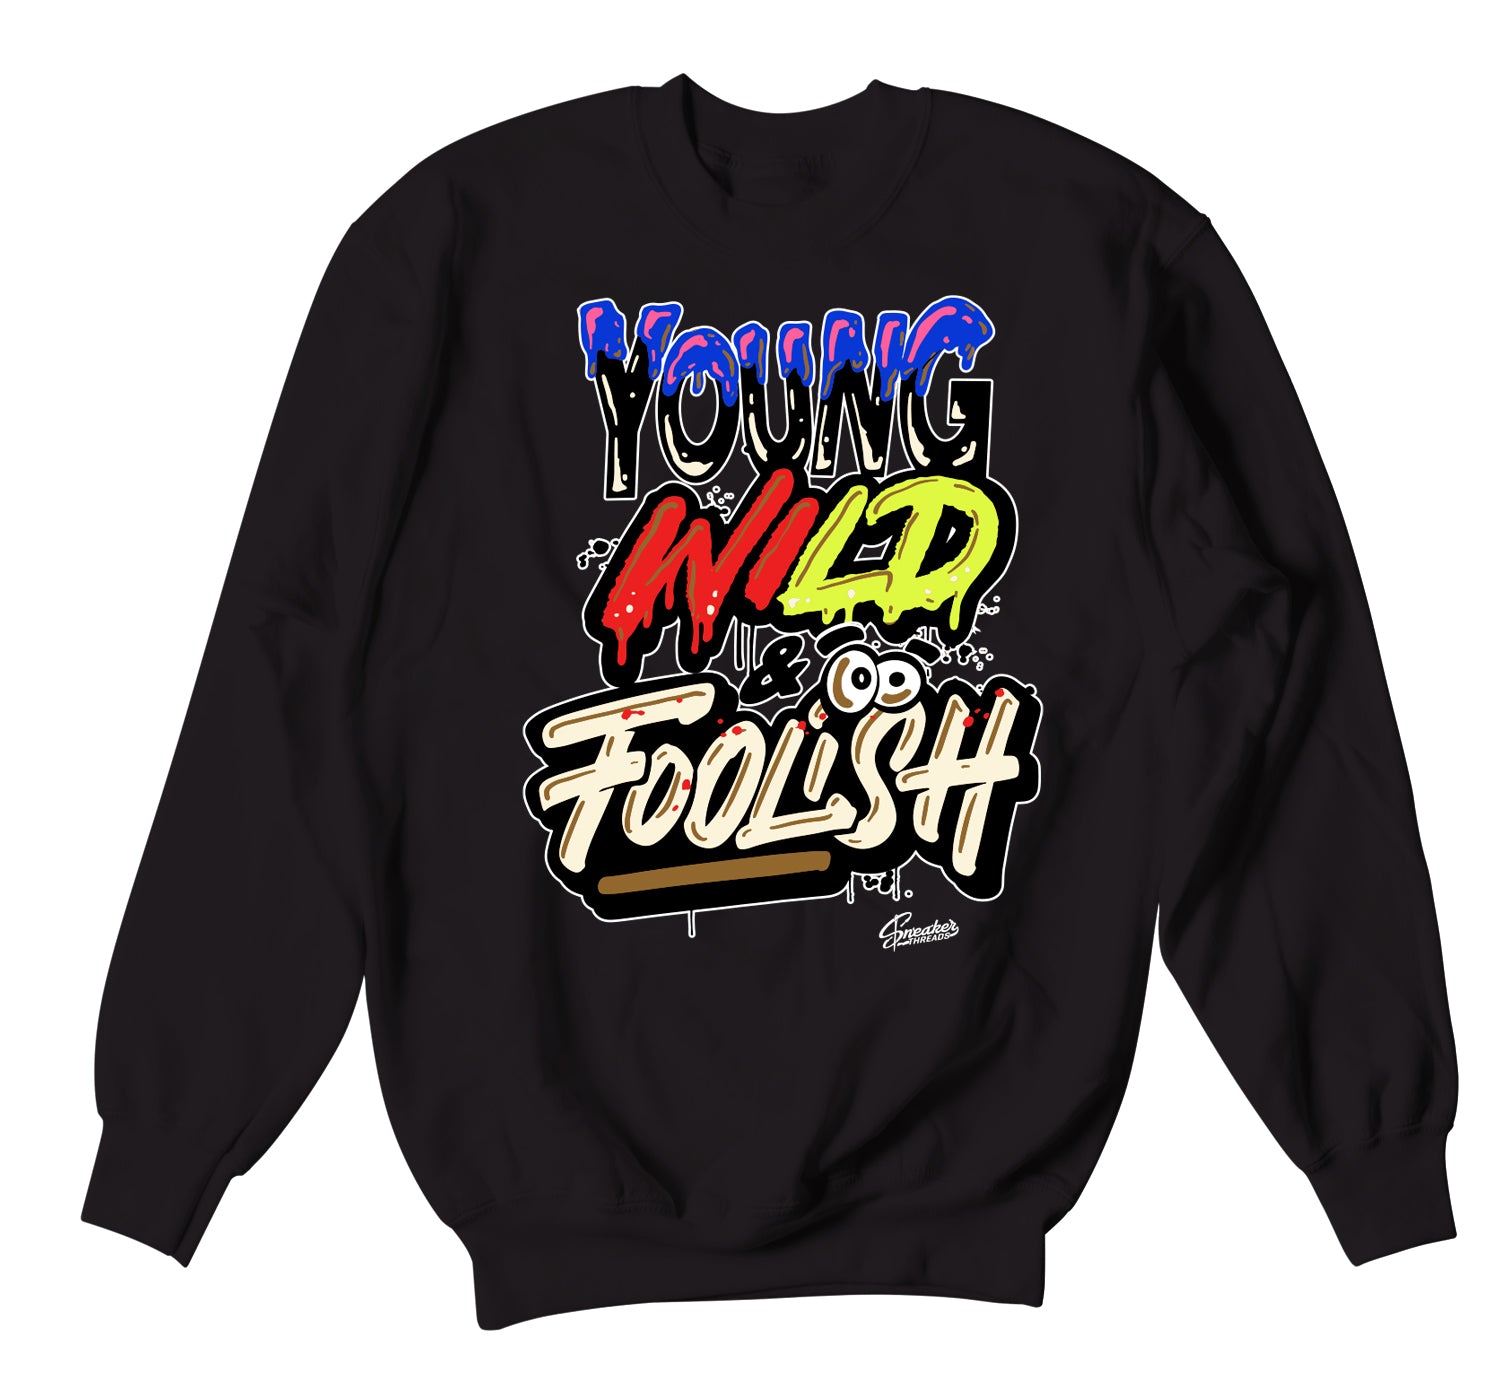 Retro 4 Wild Things Sweater - Young wild - Black